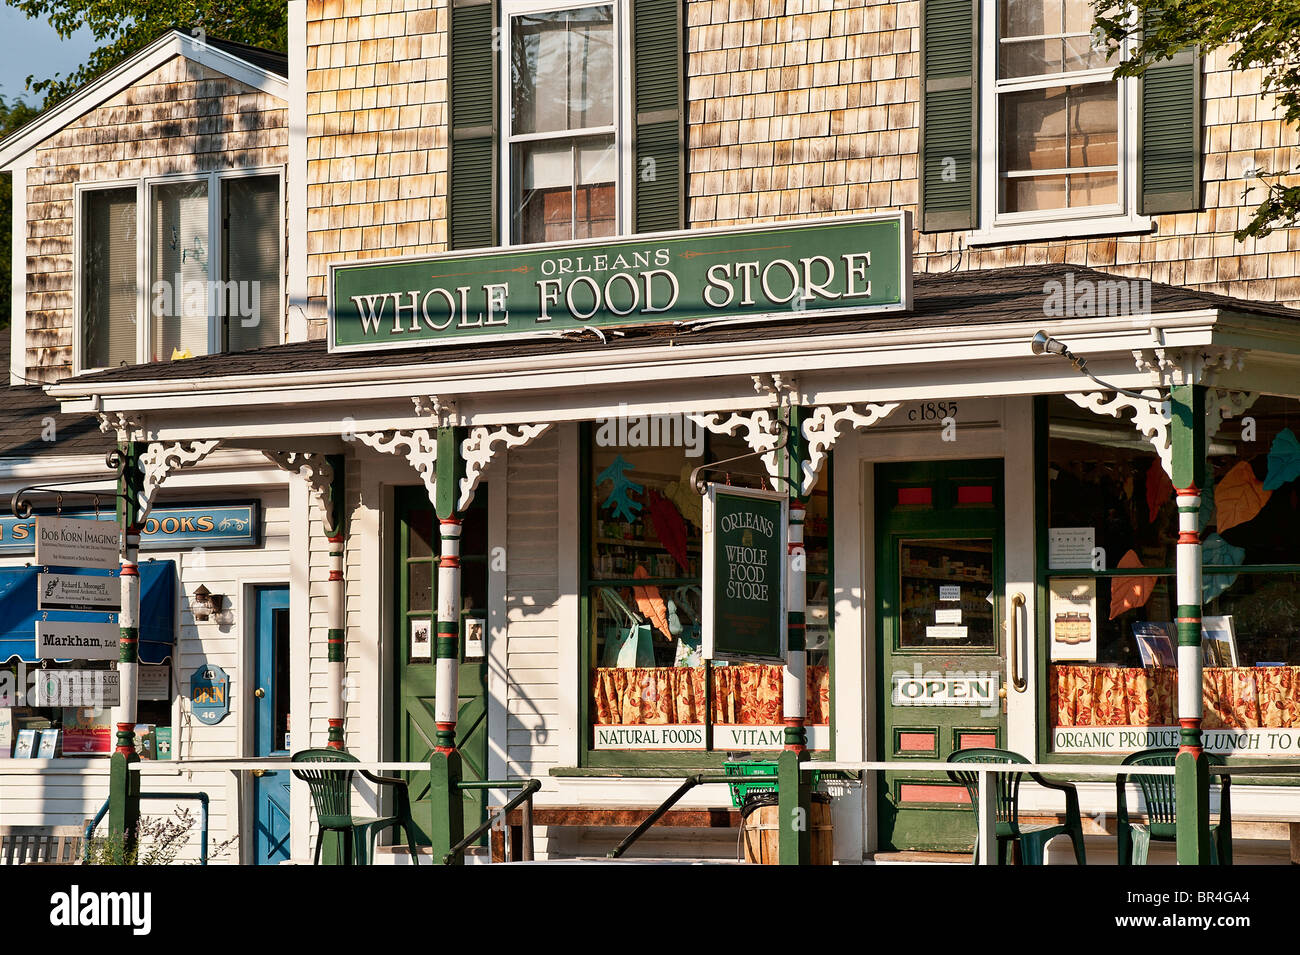 Whole Foods Store, Orleans, Cape Cod, Massachusetts, USA Stock Photo